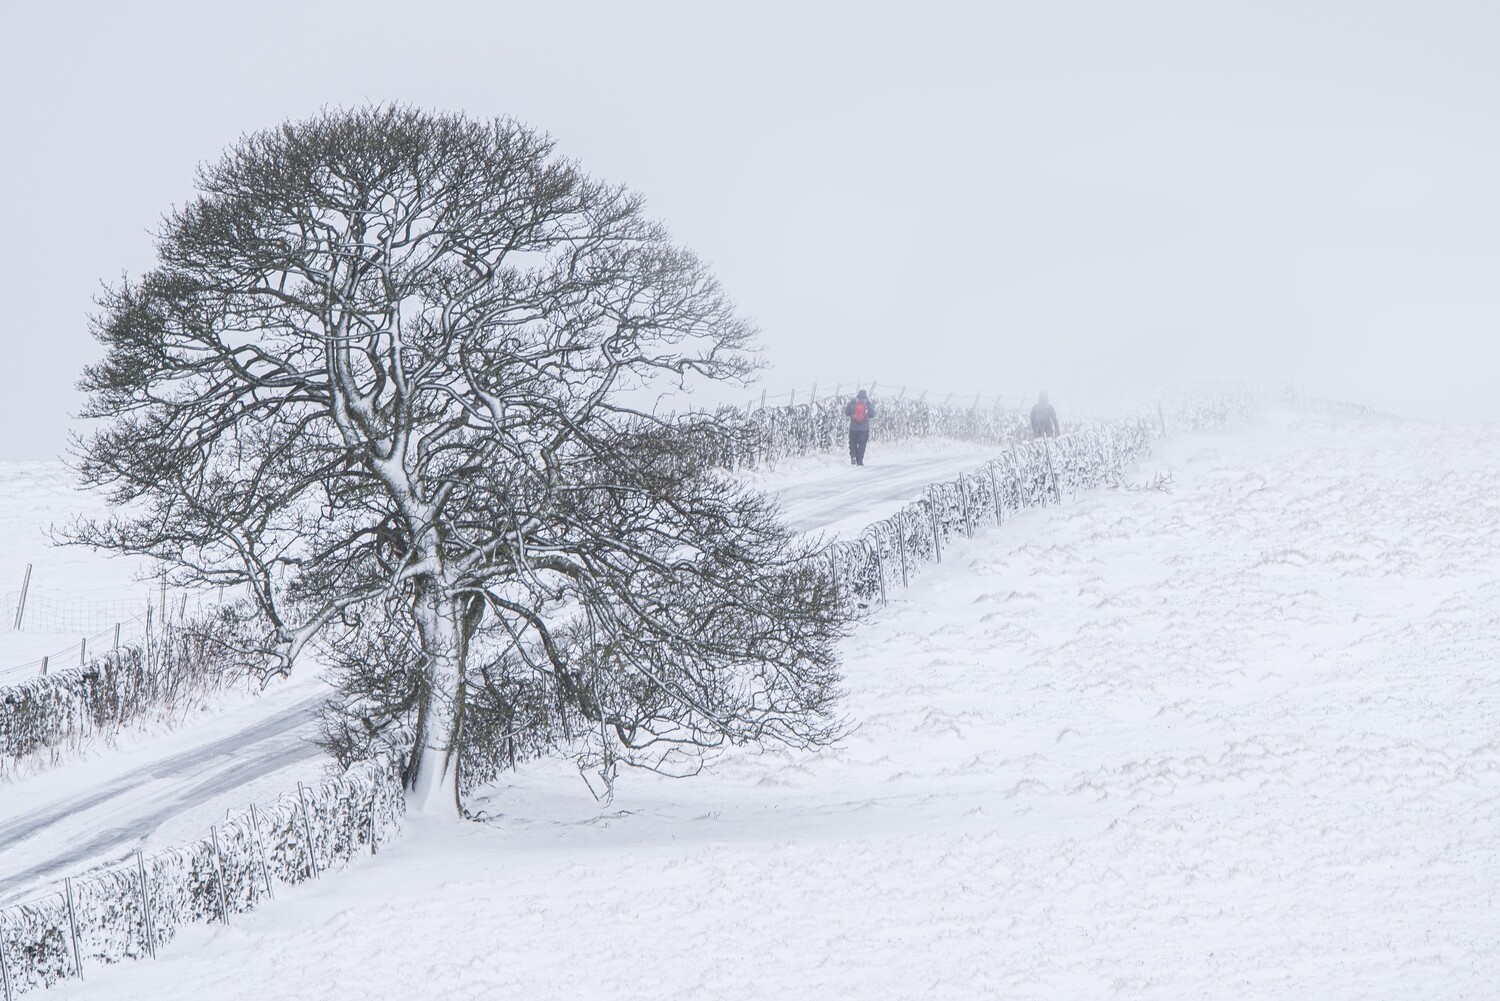 A Winter Walk Print Options (January from the Calendar)